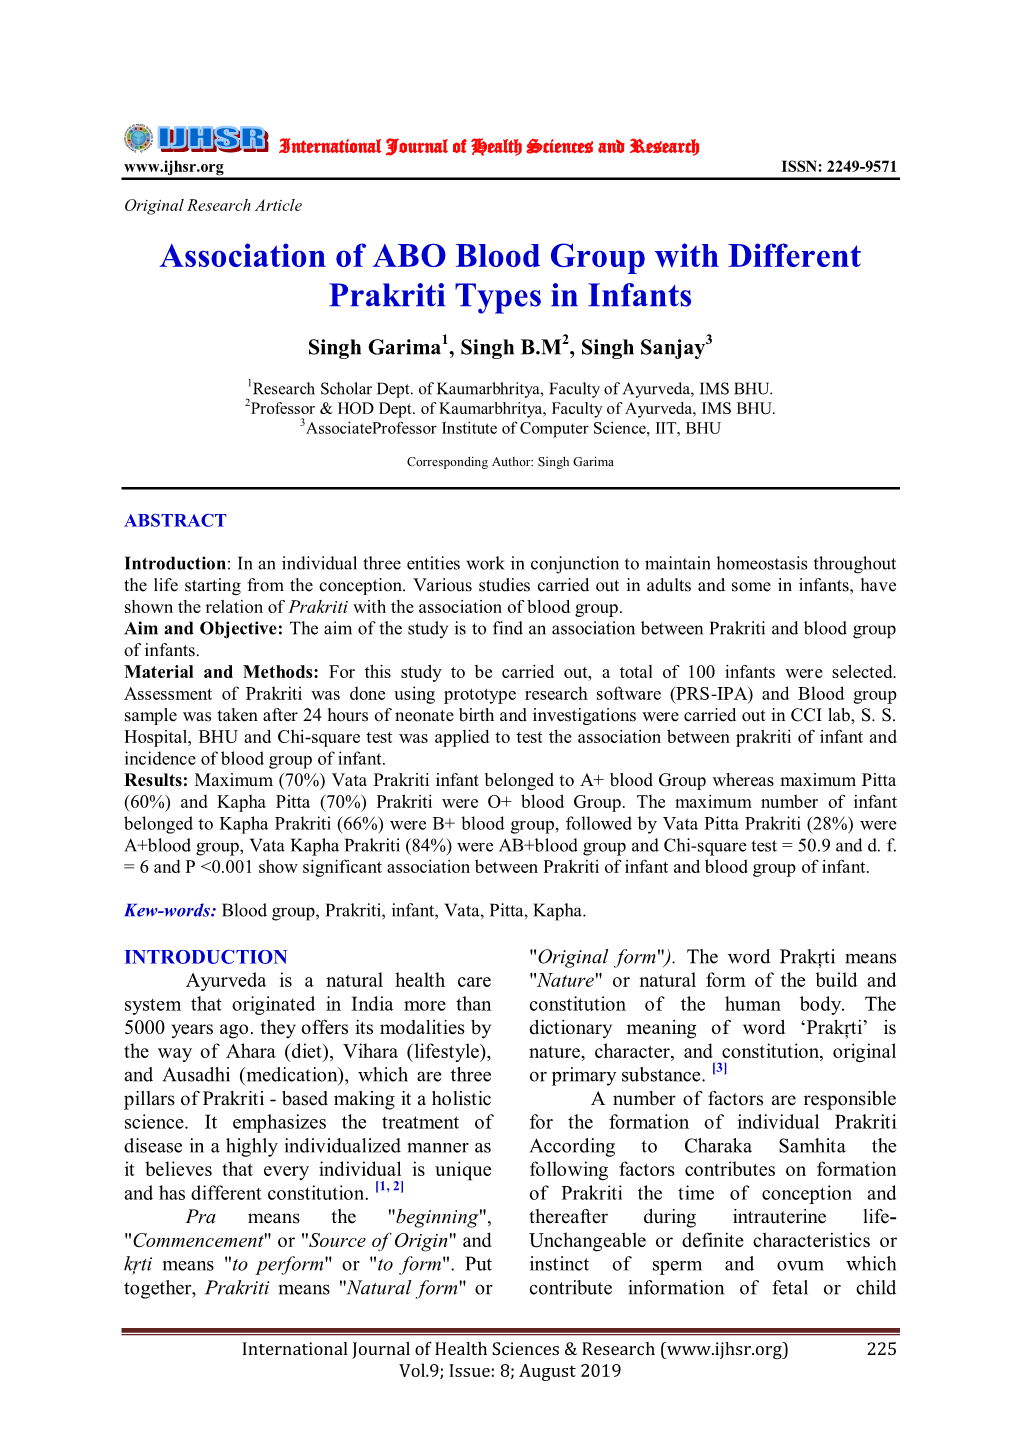 Association of ABO Blood Group with Different Prakriti Types in Infants